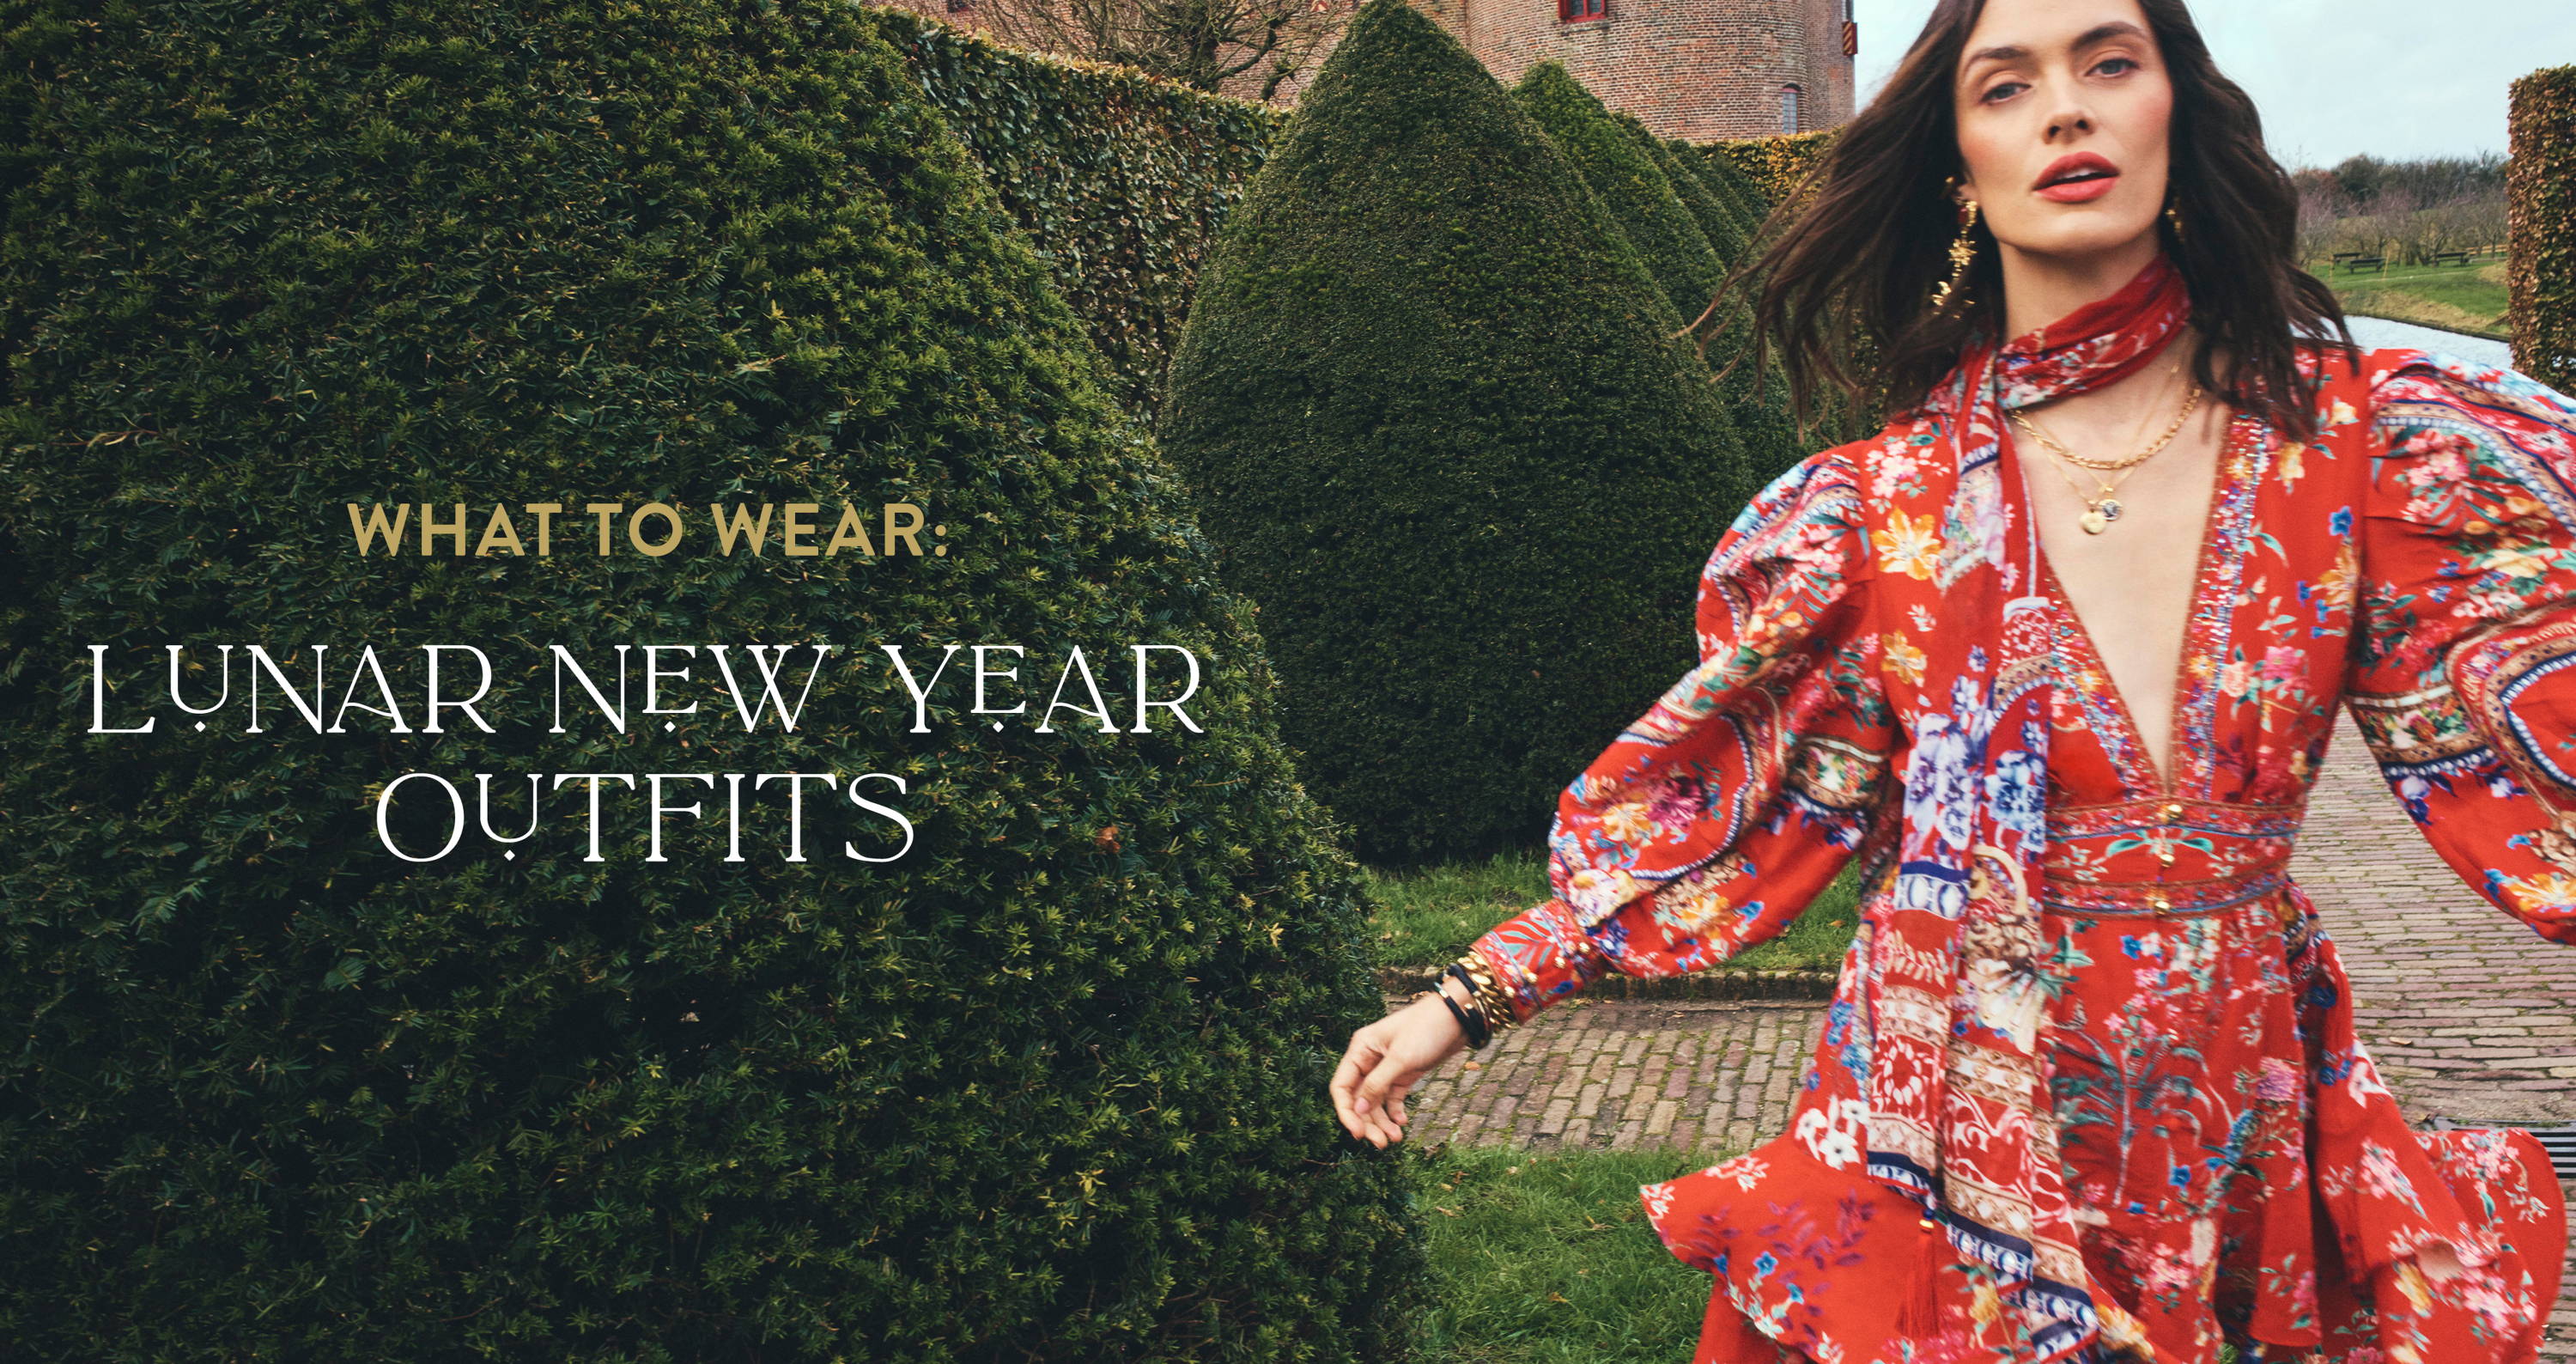 WHAT TO WEAR: LUNAR NEW YEAR OUTFITS